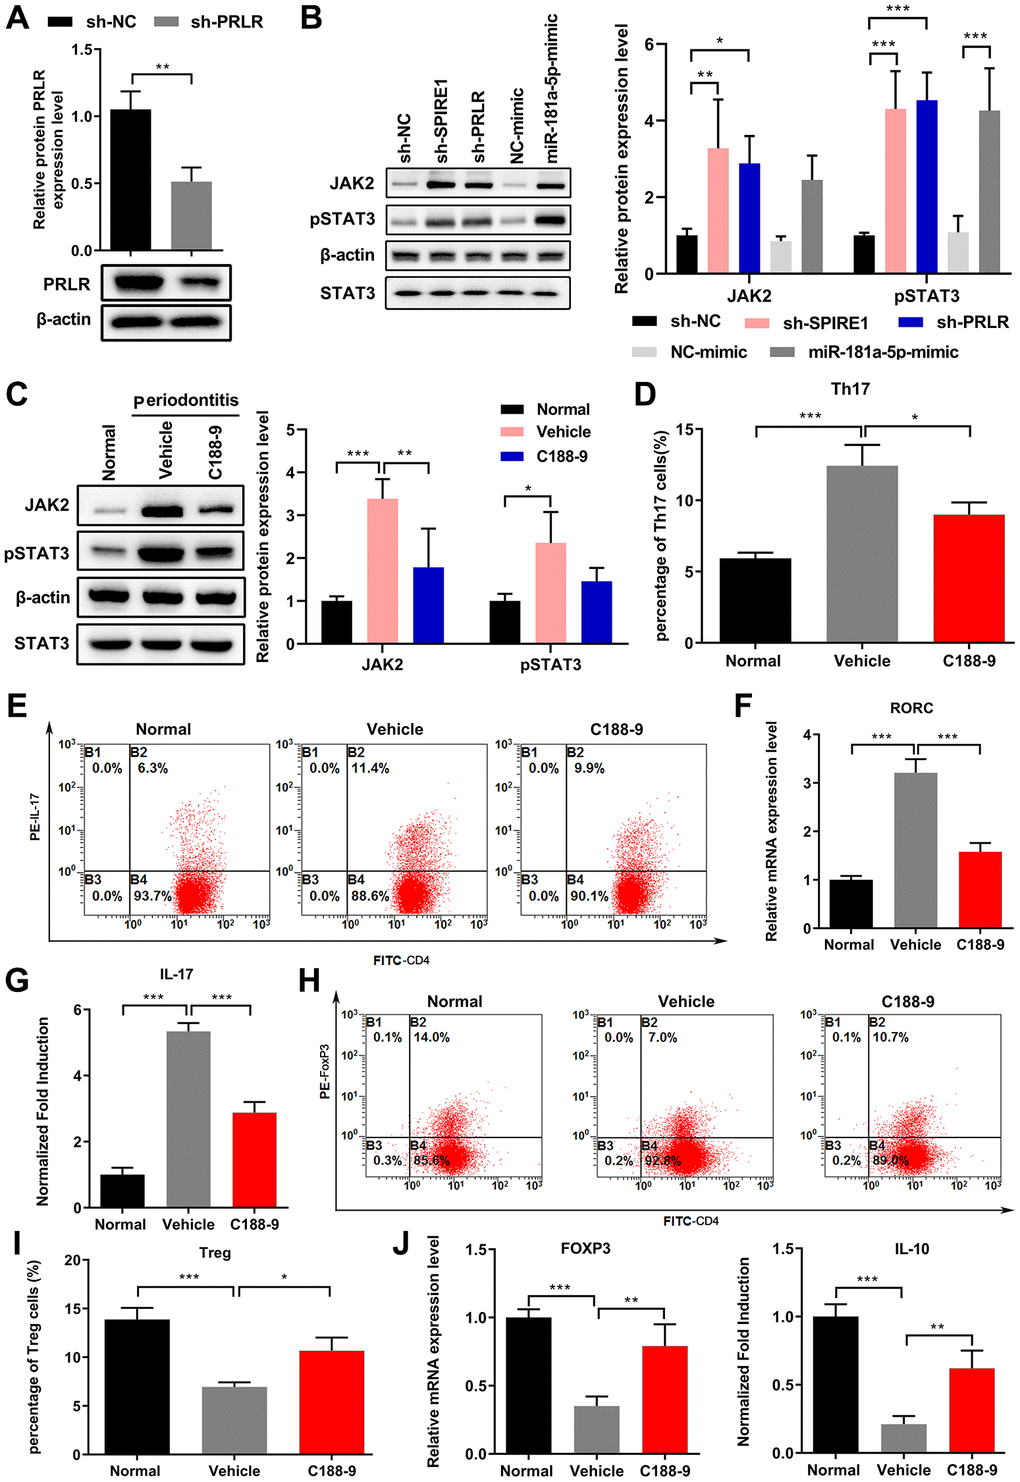 The LncRNA SPIRE1/miR-181a-5p/PRLR axis regulated the JAK/STAT3 signaling in mouse mandibular BM-MSCs to modulate the Th17/Treg balance. (A) The knockdown efficiency of PRLR-specific shRNA in mandibular BM-MSCs was confirmed by qPCR analysis of BM-MSCs transfected with plasmid expressing the indicated shRNA. (B) Knockdown of LncRNA SPIRE1 or PRLR, or transfection of miR-181a-5p mimics activated the JAK/STAT3 pathway, as evidenced by increased expression of JAK2 and phosphorylated STAT3 (pSTAT3). The protein levels of JAK2 and pSTAT3 in mandibular BM-MSCs after the indicated transfections were quantitated by western blot assays. (C) Mandibular BM-MSCs from periodontitis mice had more activated JAK/STAT3 signaling than that from normal controls, which was inhibited by the STAT3 inhibitor C188-9. The protein levels of JAK2 and pSTAT3 were quantitated as in (B). (D–J) Mandibular BM-MSCs from periodontitis mice were treated with vehicle or STAT3 inhibitor C188-9, while mandibular BM-MSCs from normal control mice were used as controls. After co-culturing of these BM-MSCs with pre-activated CD4+ T cells, the percentages of CD4+IL-17+ Th17 cells (D, E), RORC mRNA levels (F), soluble IL-17 level in culture medium (G), as well as the percentages of CD4+FoxP3+ Tregs (H, I), FoxP3 mRNA levels and soluble IL-10 levels in culture medium (J) were measured. n = 3 for each group; *P **P ***P 